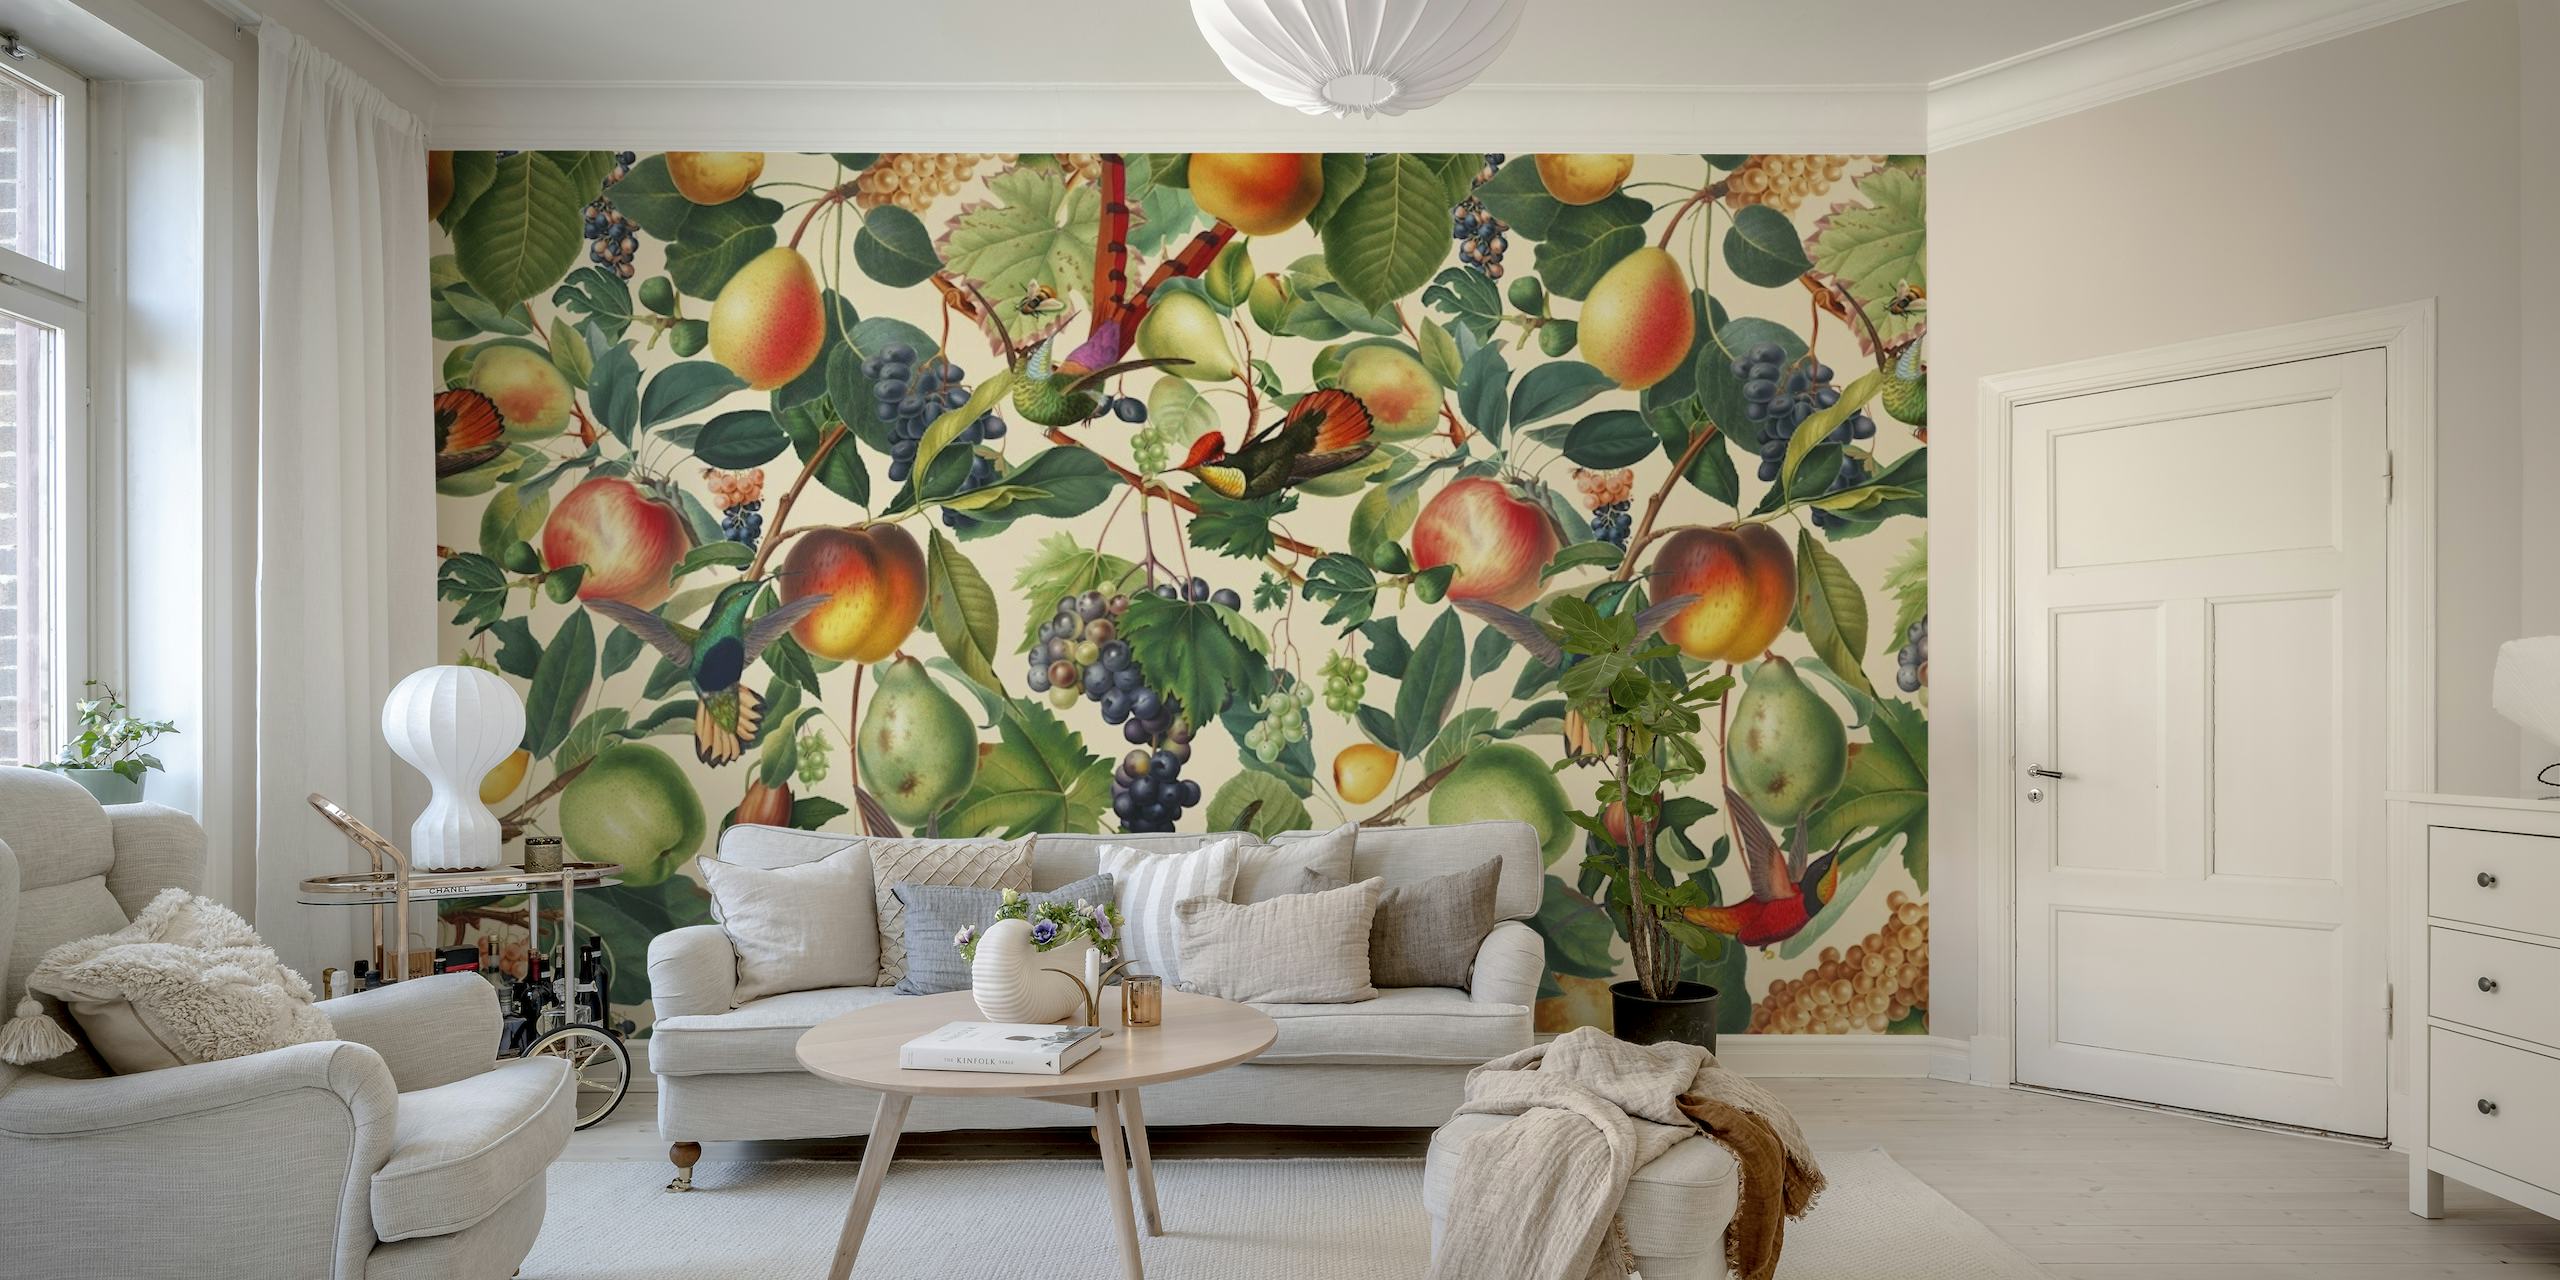 Summer-themed wall mural with a variety of fruits like peaches and grapes amidst green leaves pattern